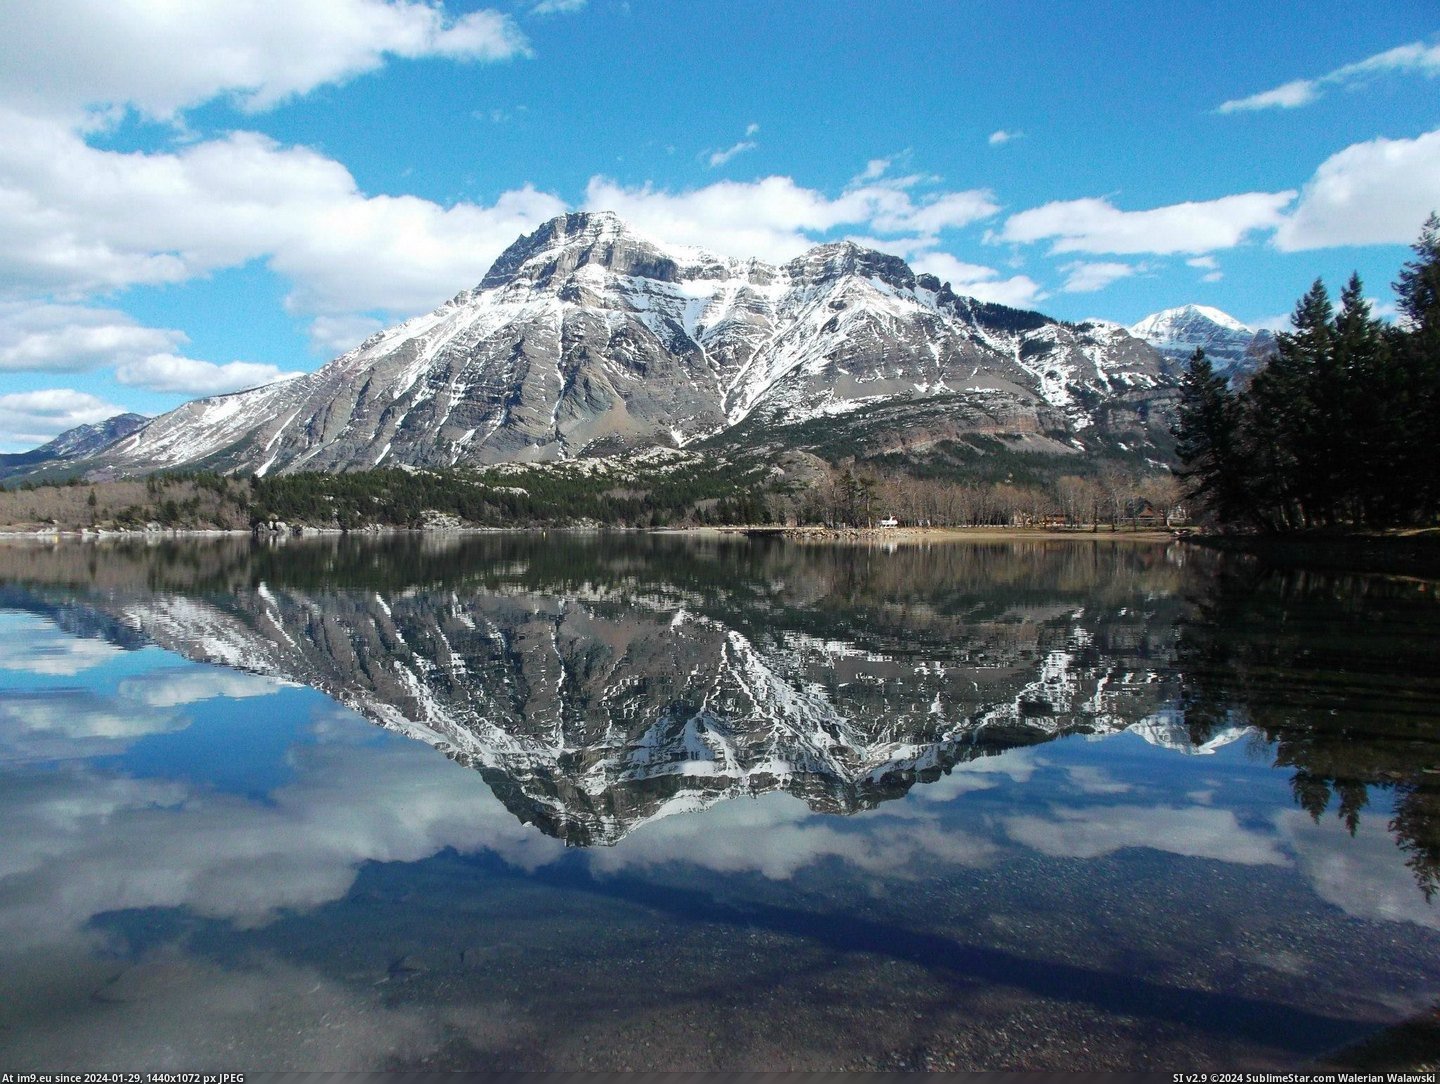 #Park #National #Alberta #Vimy #Waterton #2048x1536 #Lakes #Reflection [Earthporn] Reflection of Mt. Vimy in Waterton Lakes National Park, Alberta [2048x1536] Pic. (Изображение из альбом My r/EARTHPORN favs))